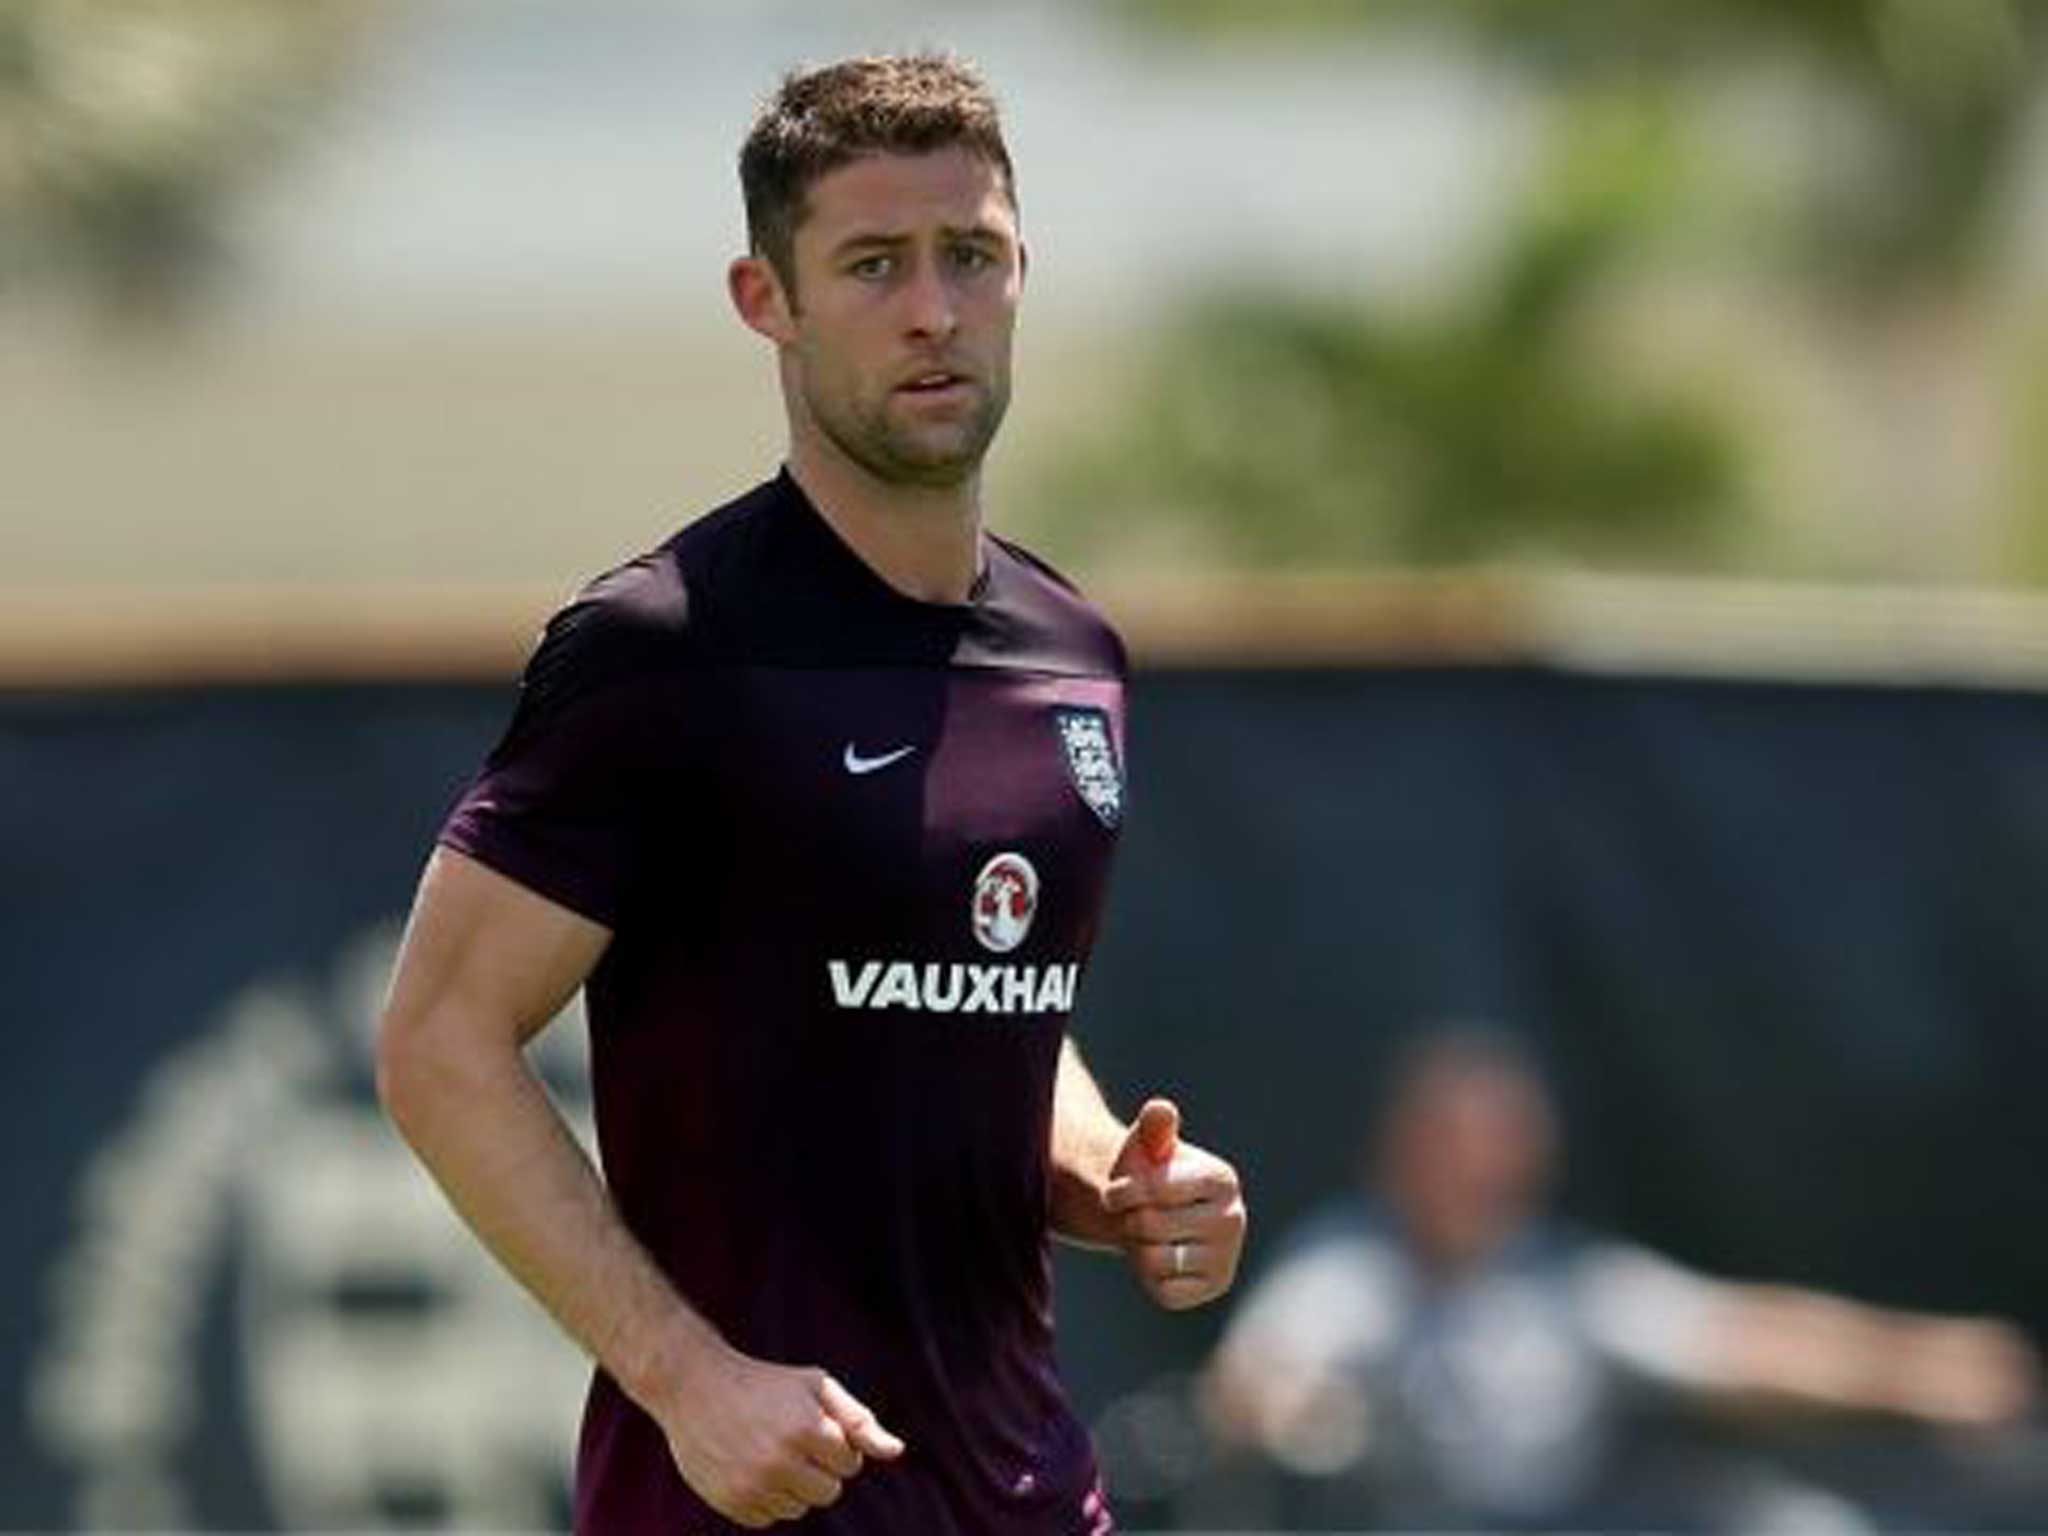 Gary Cahill in action during an England training session